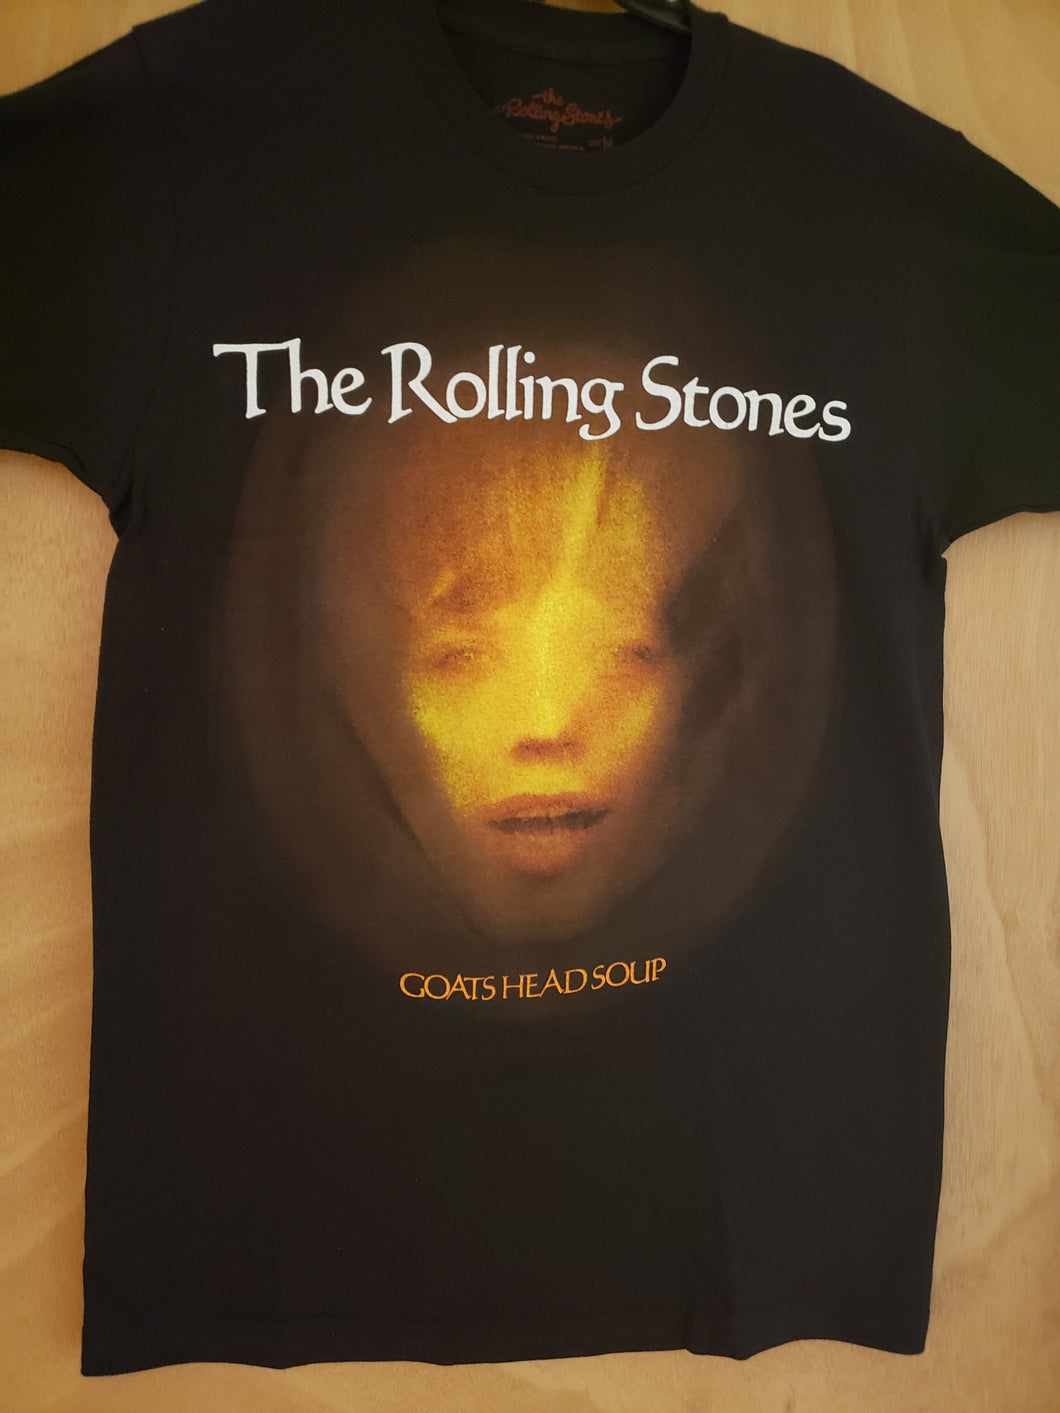 THE ROLLING STONES T-SHIRT BRAND NEW EXTRA LARGE